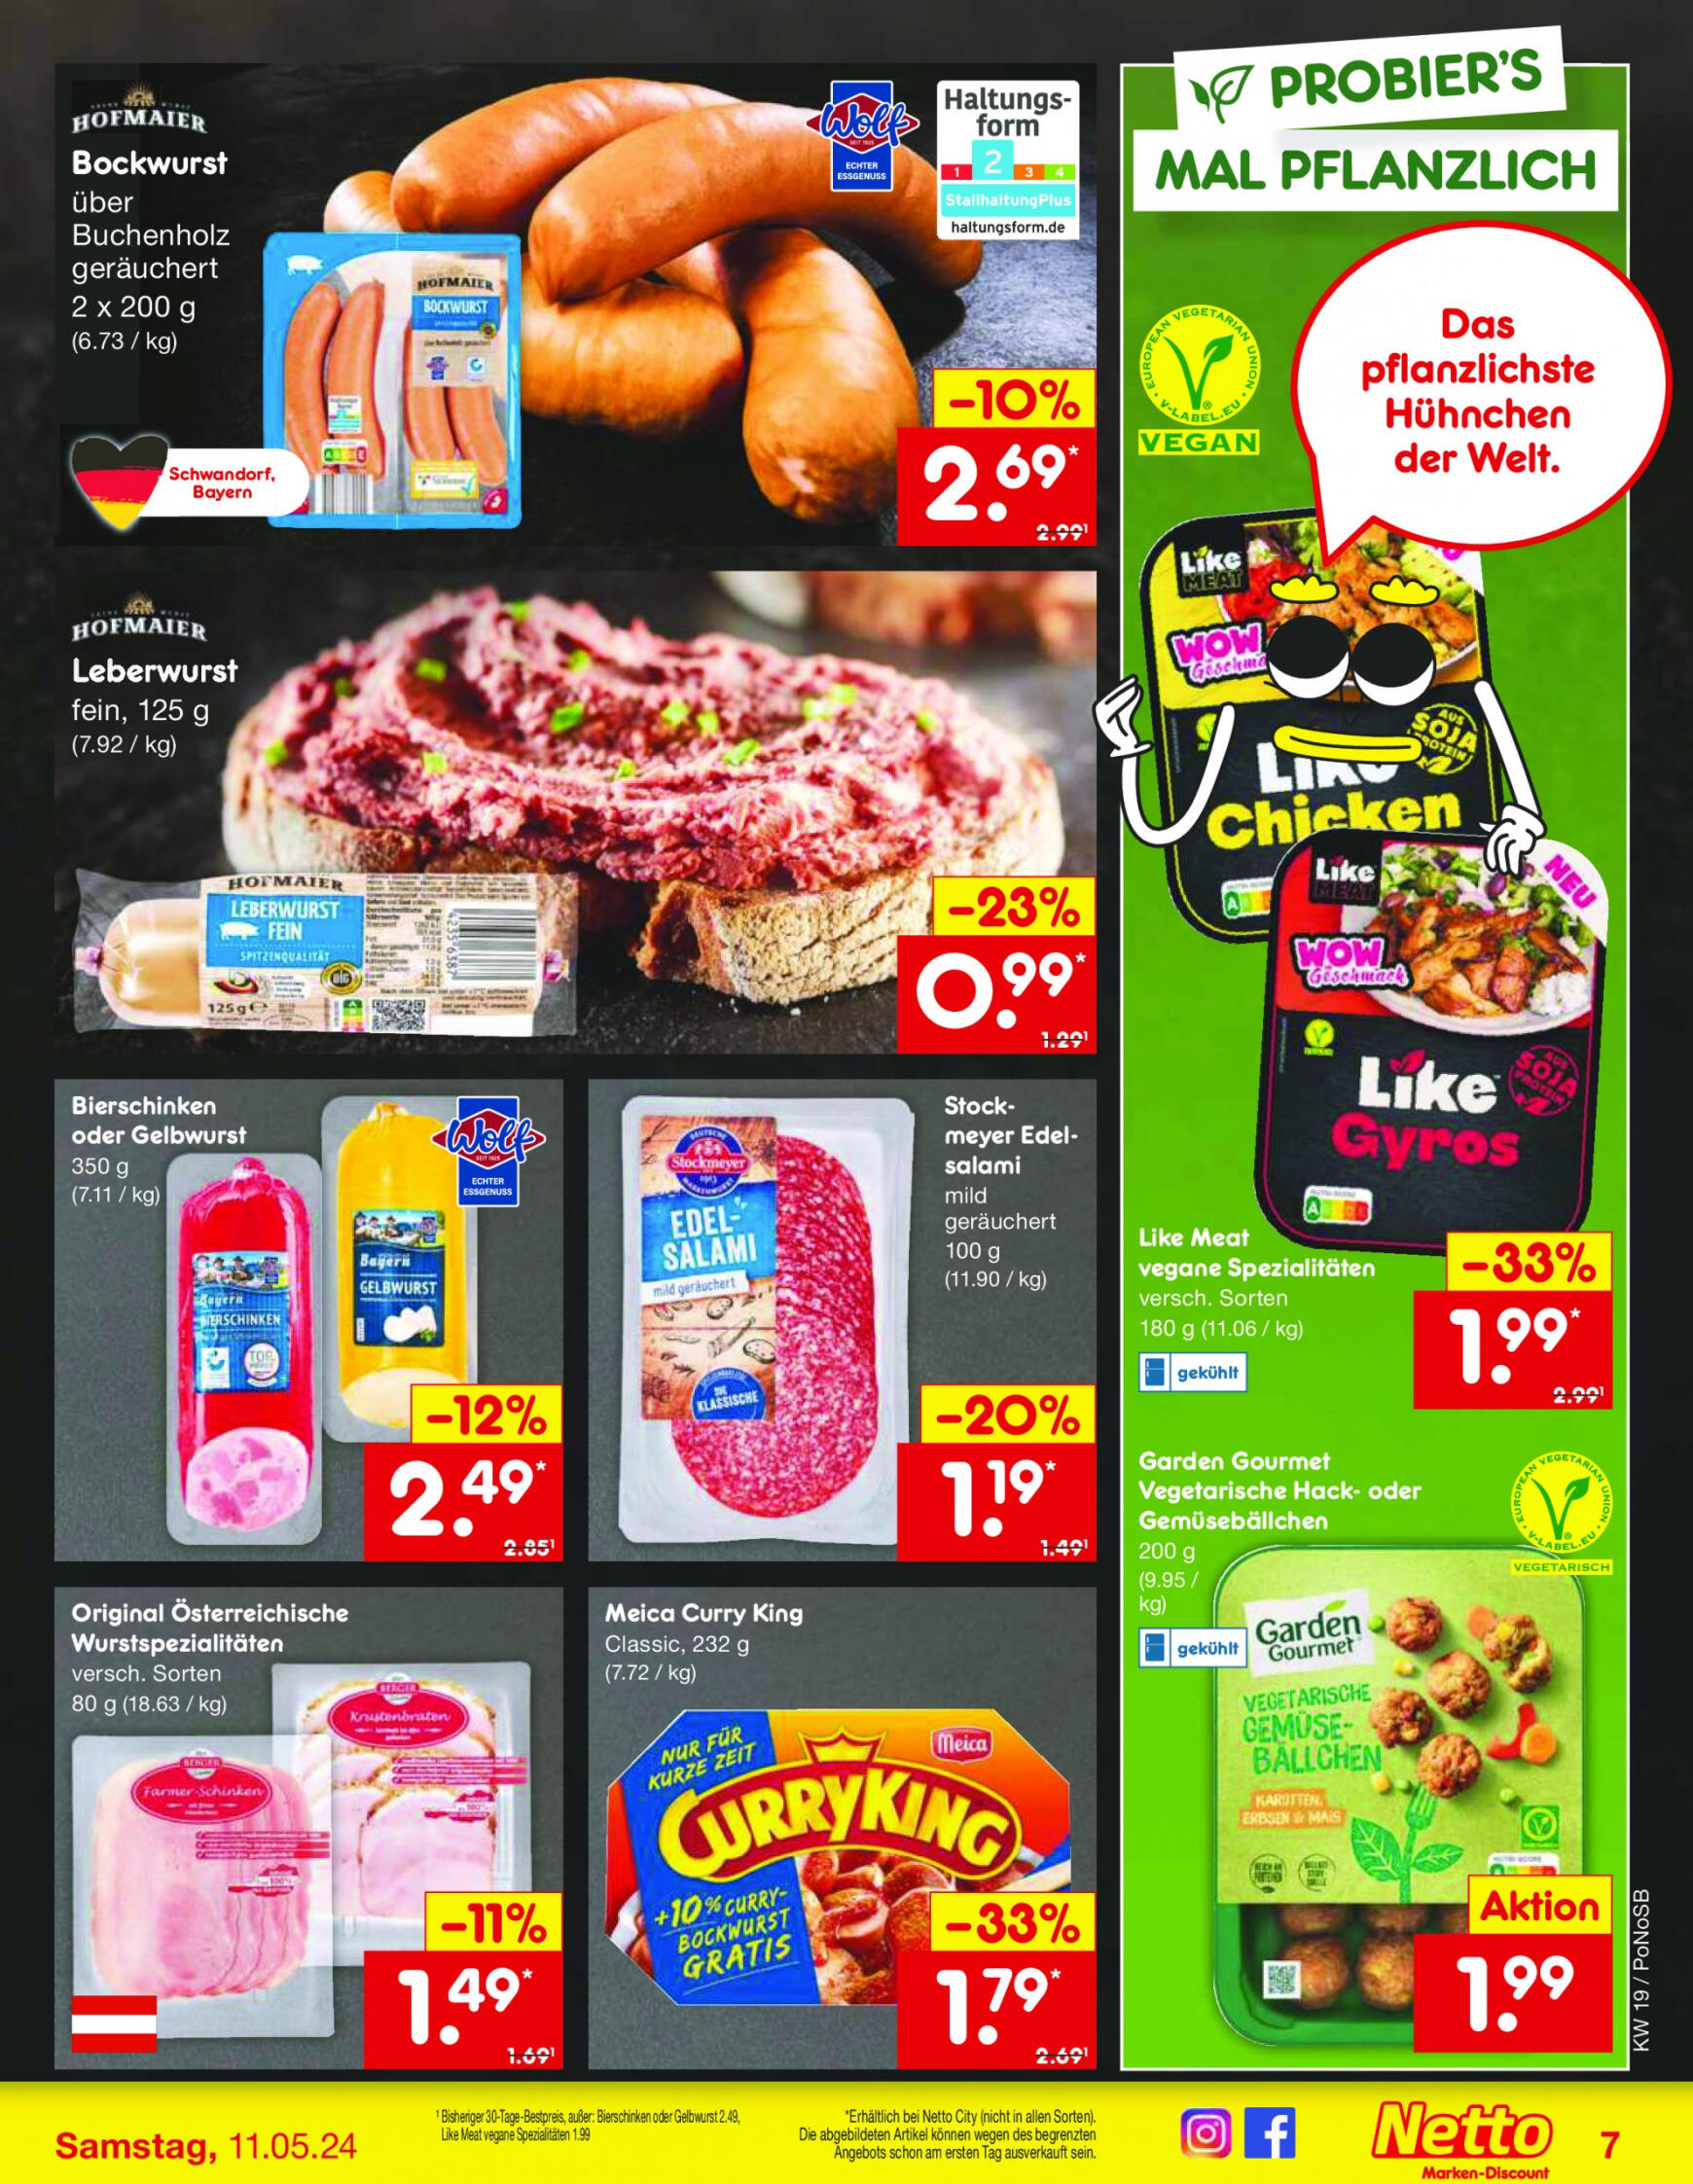 netto - Flyer Netto aktuell 06.05. - 11.05. - page: 7